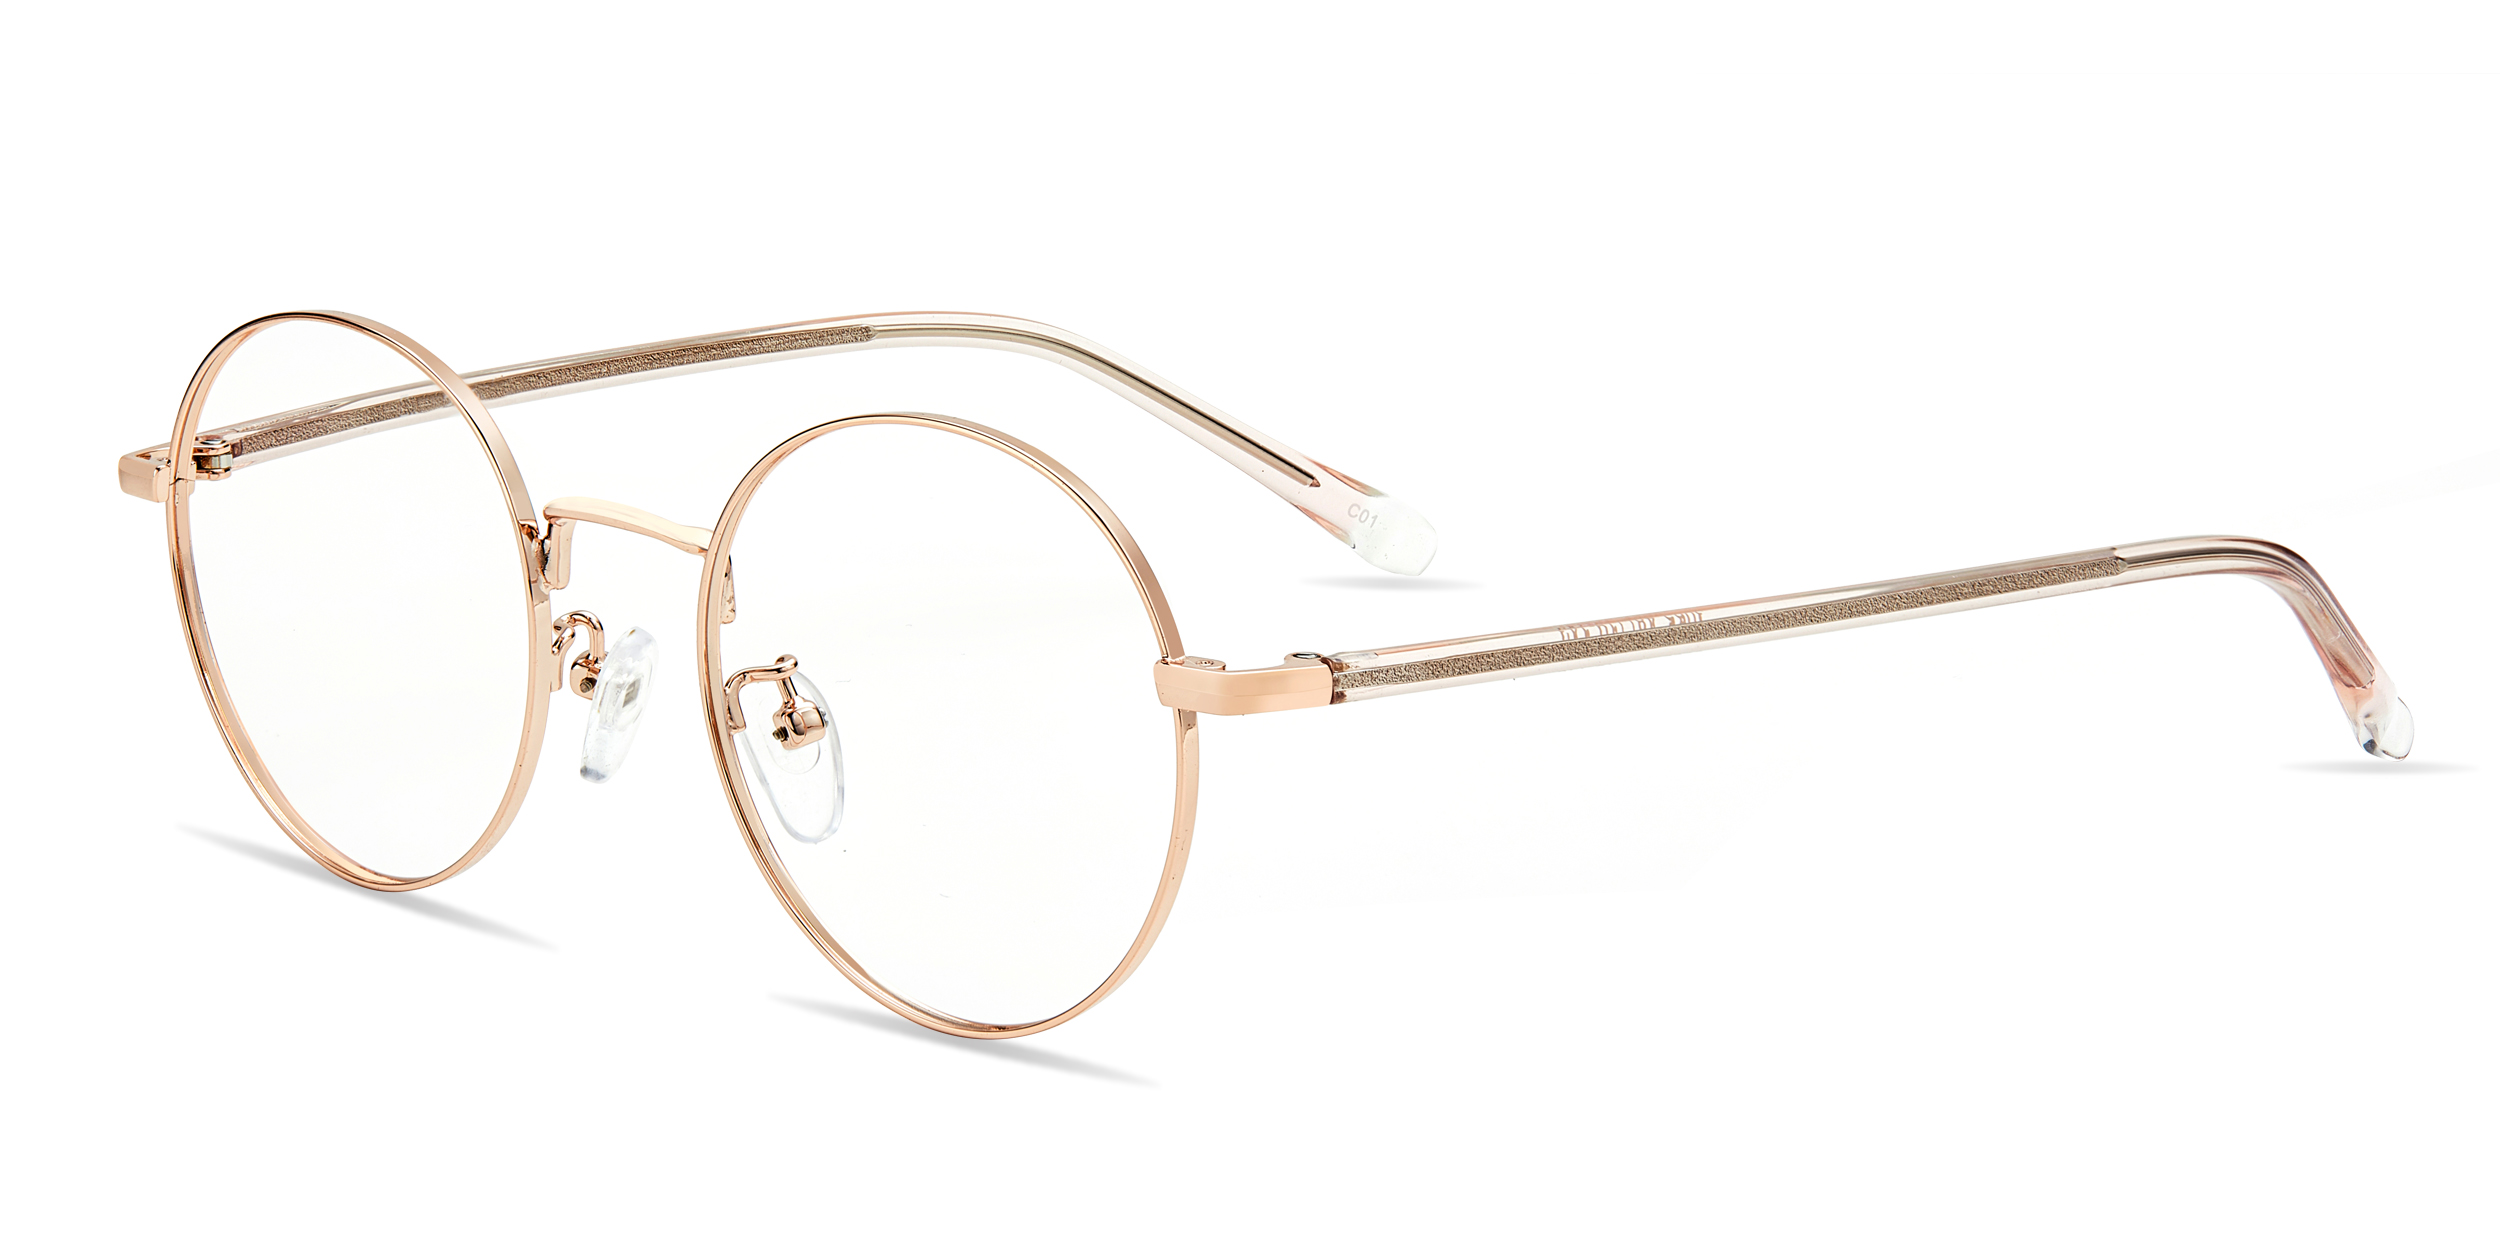 Simon Delicate Round Eyeglasses with Swagger | Zinff Optical